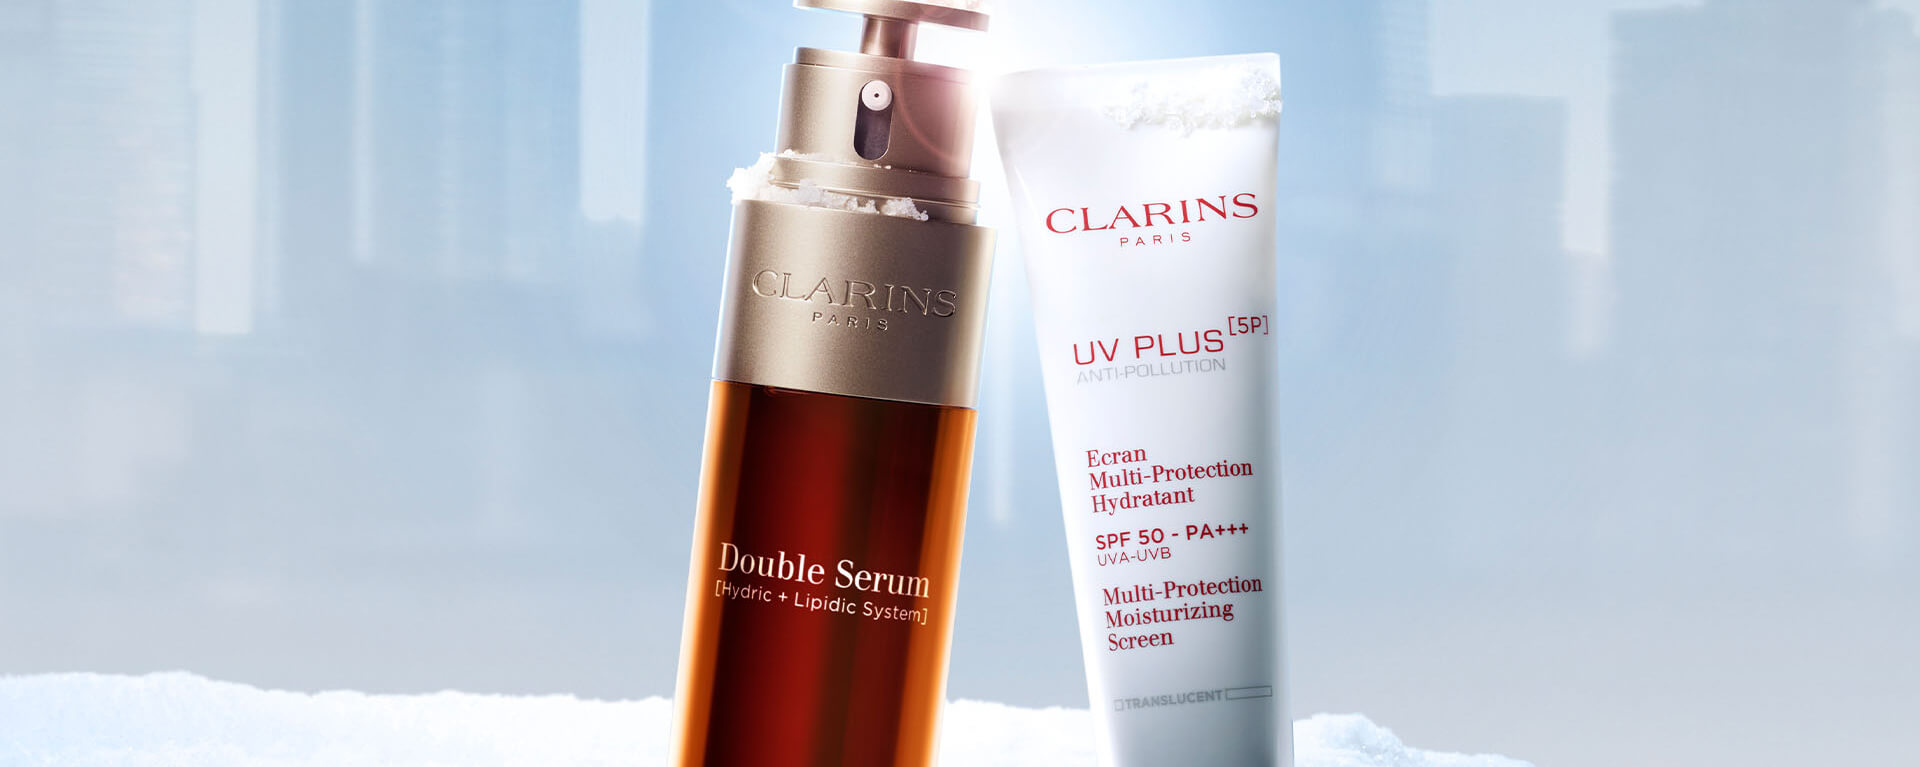 clarins-collection-banner-3